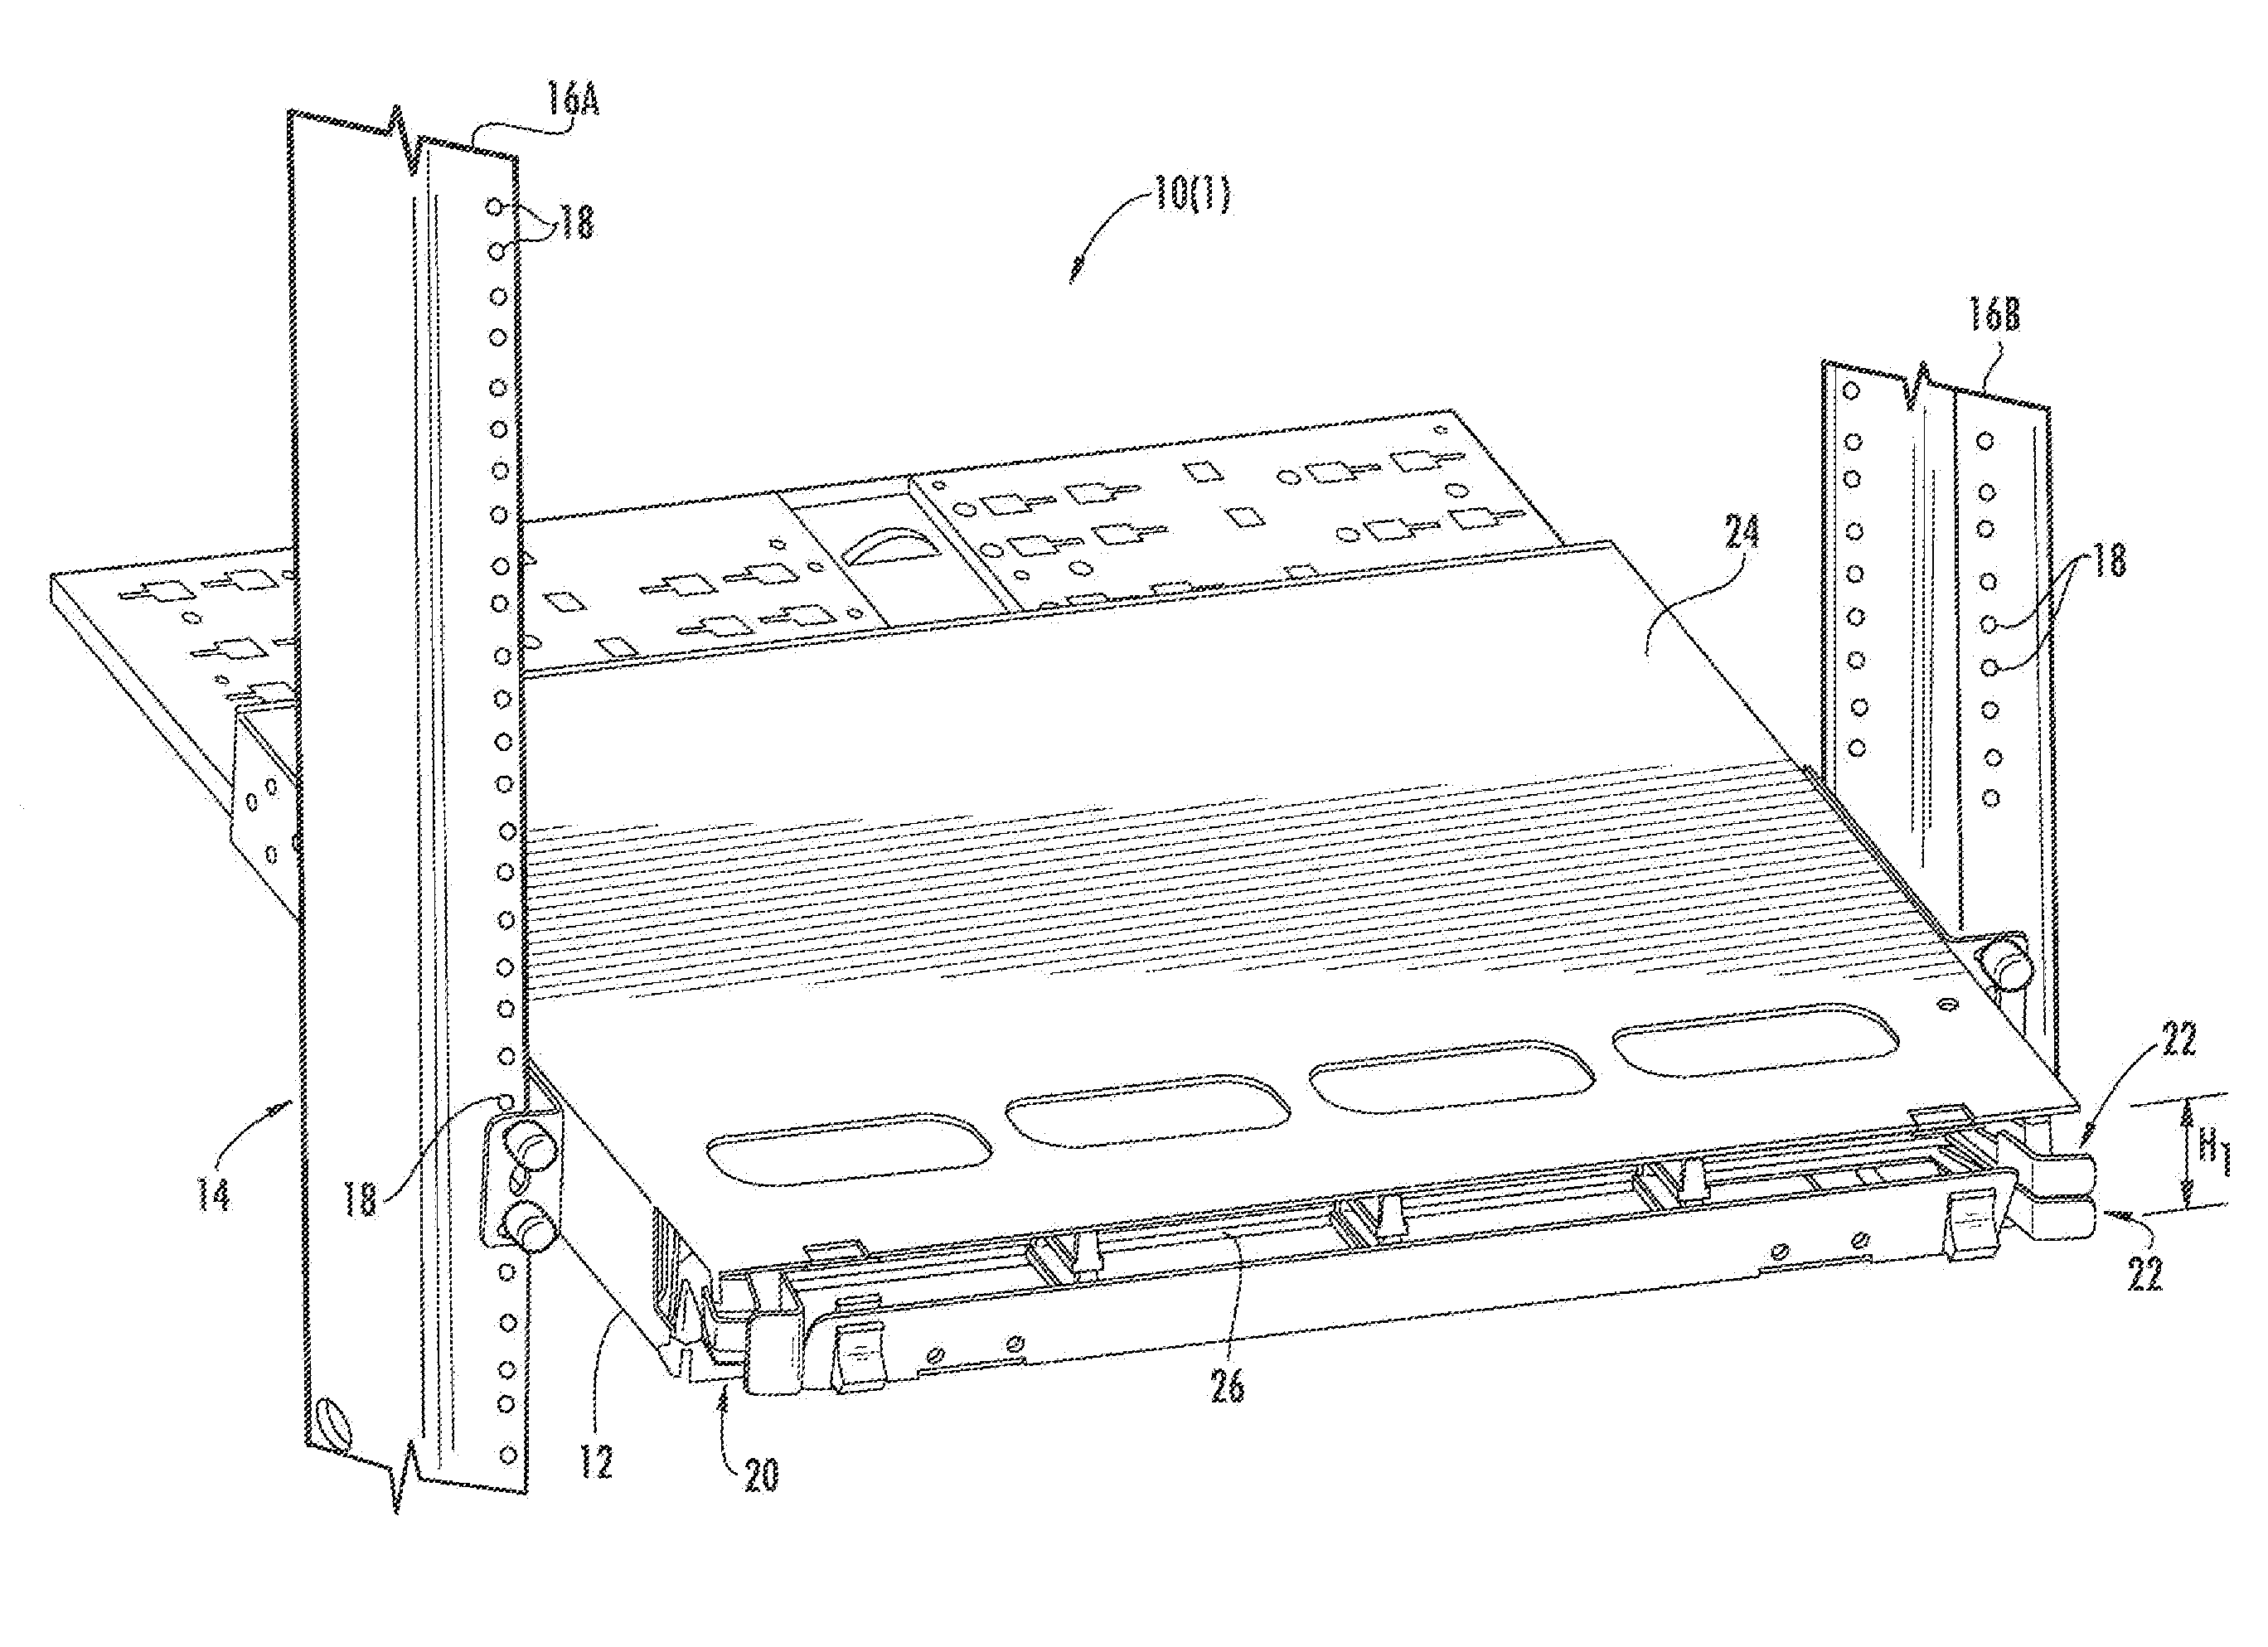 Attachment mechanisms employed to attach a rear housing section to a fiber optic housing, and related assemblies and methods